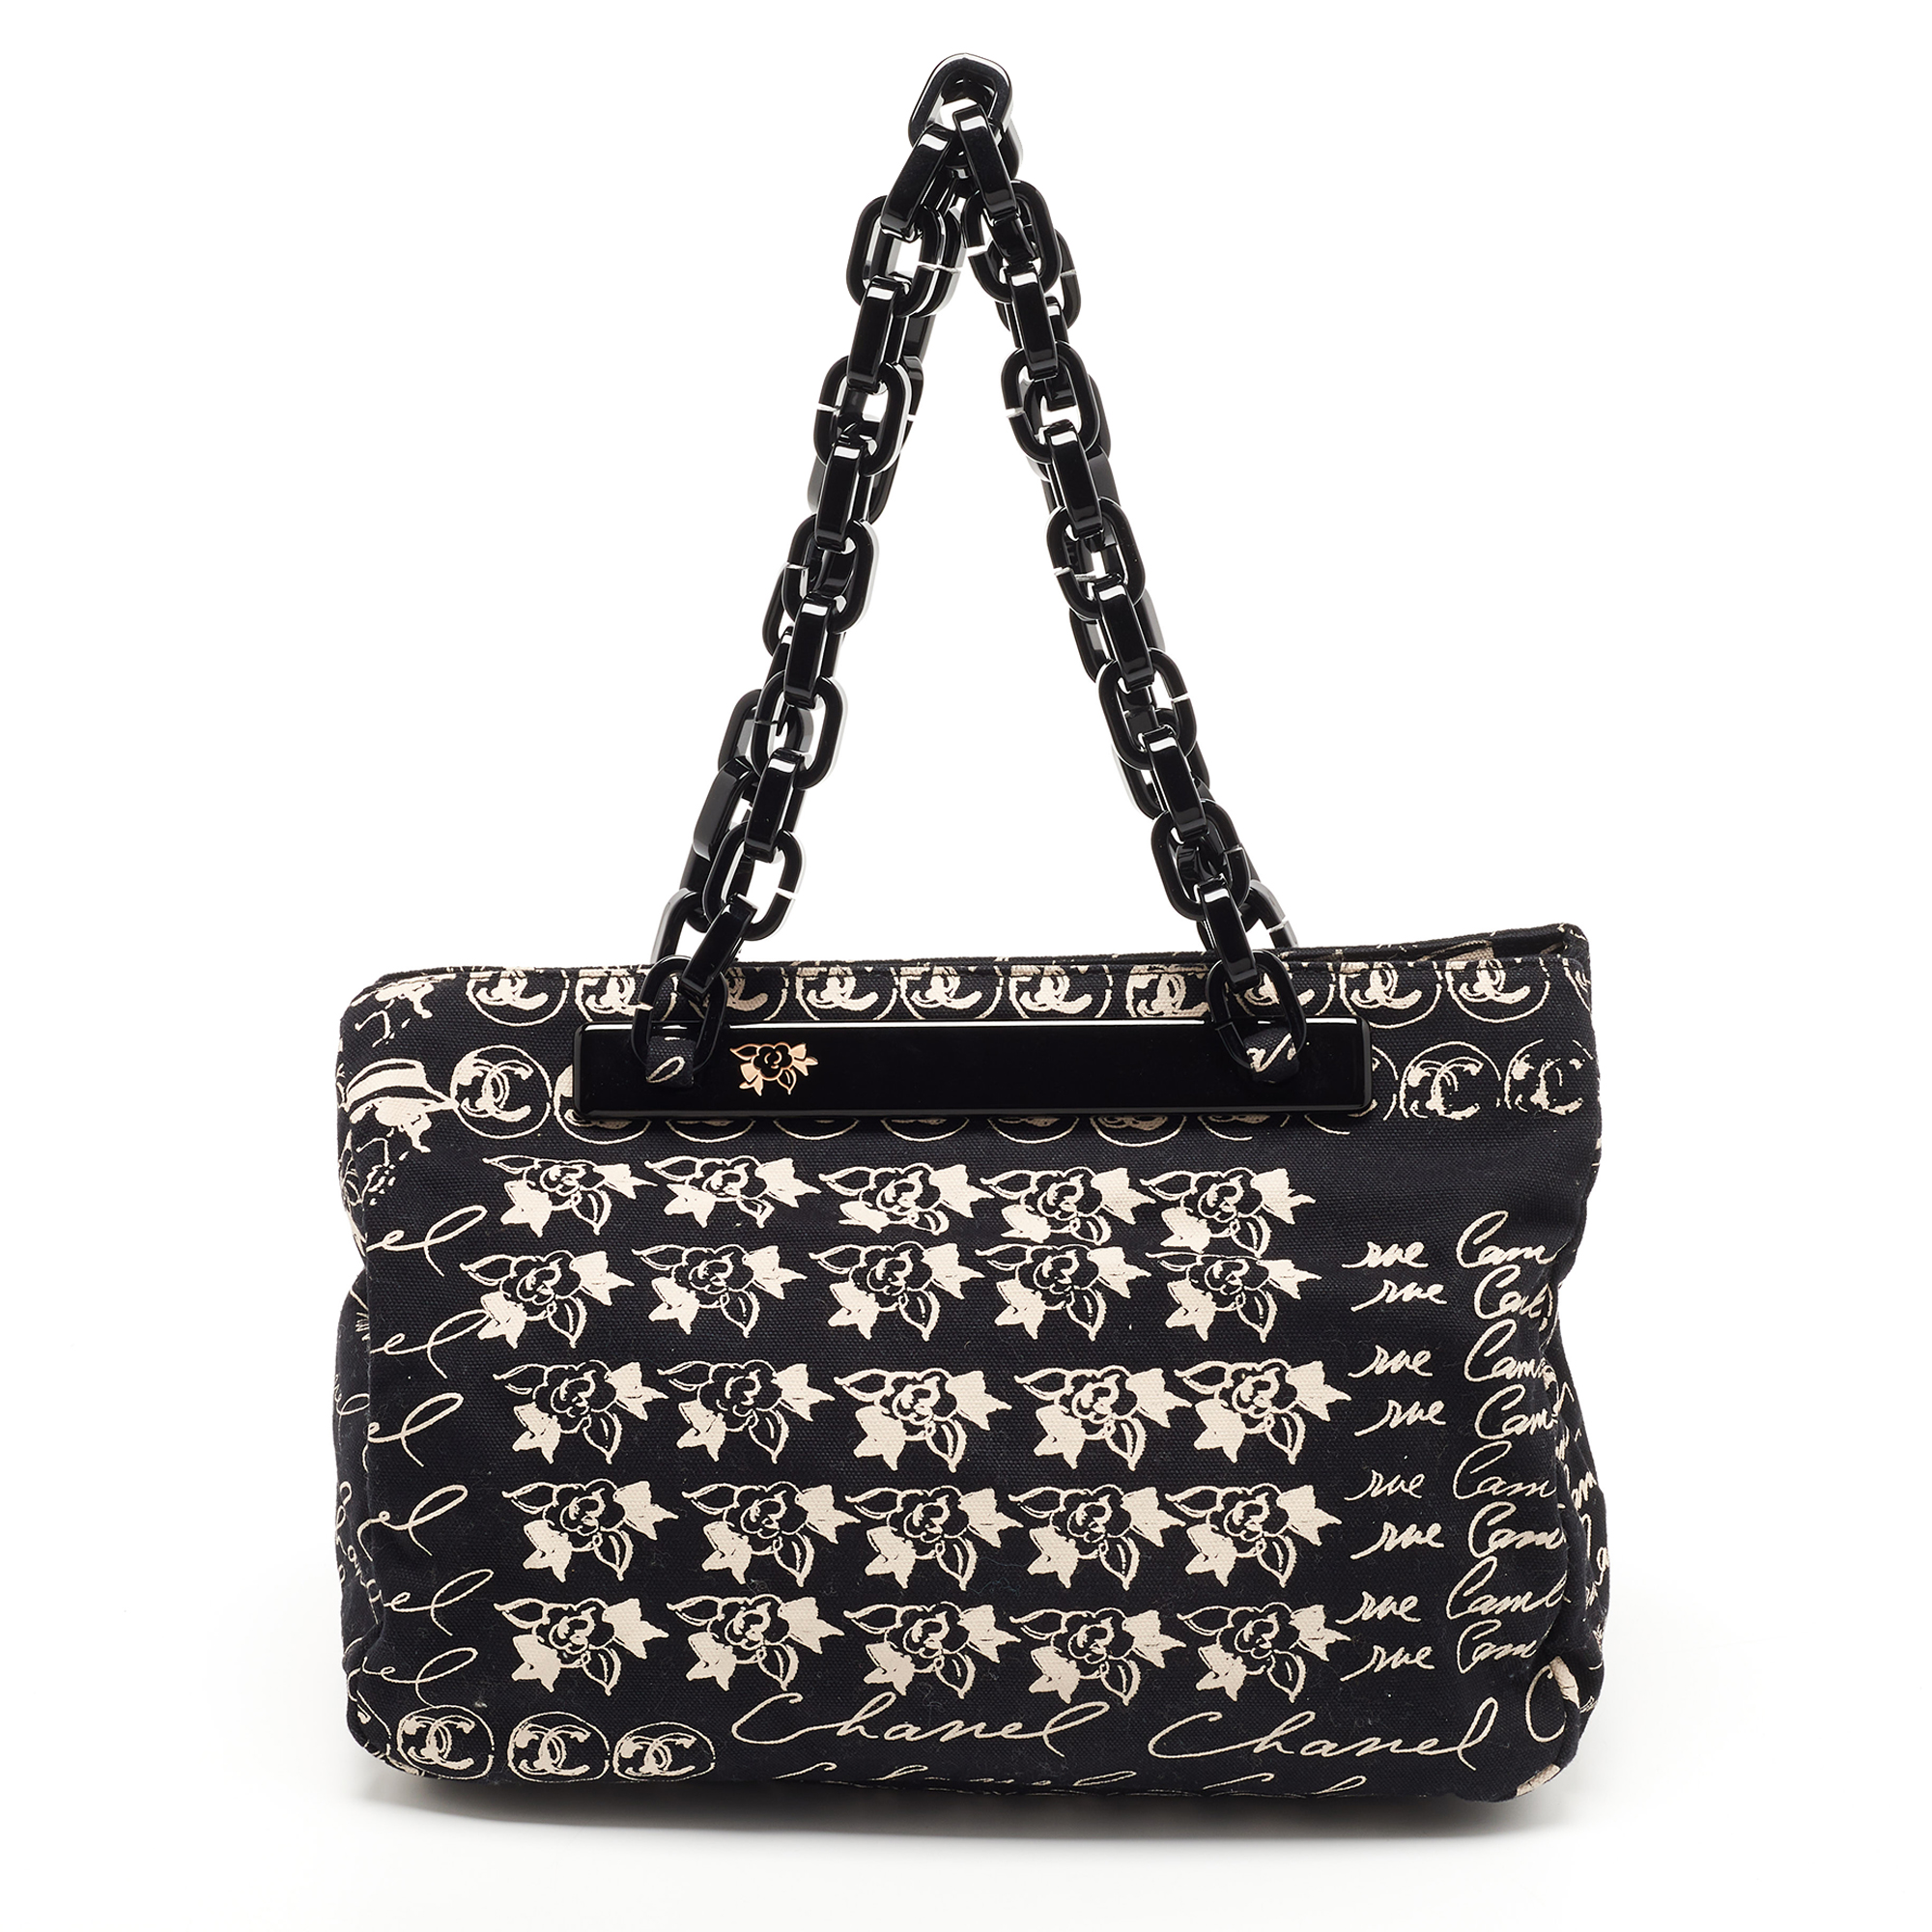 Chanel Black/White Printed Canvas Chain Link Tote